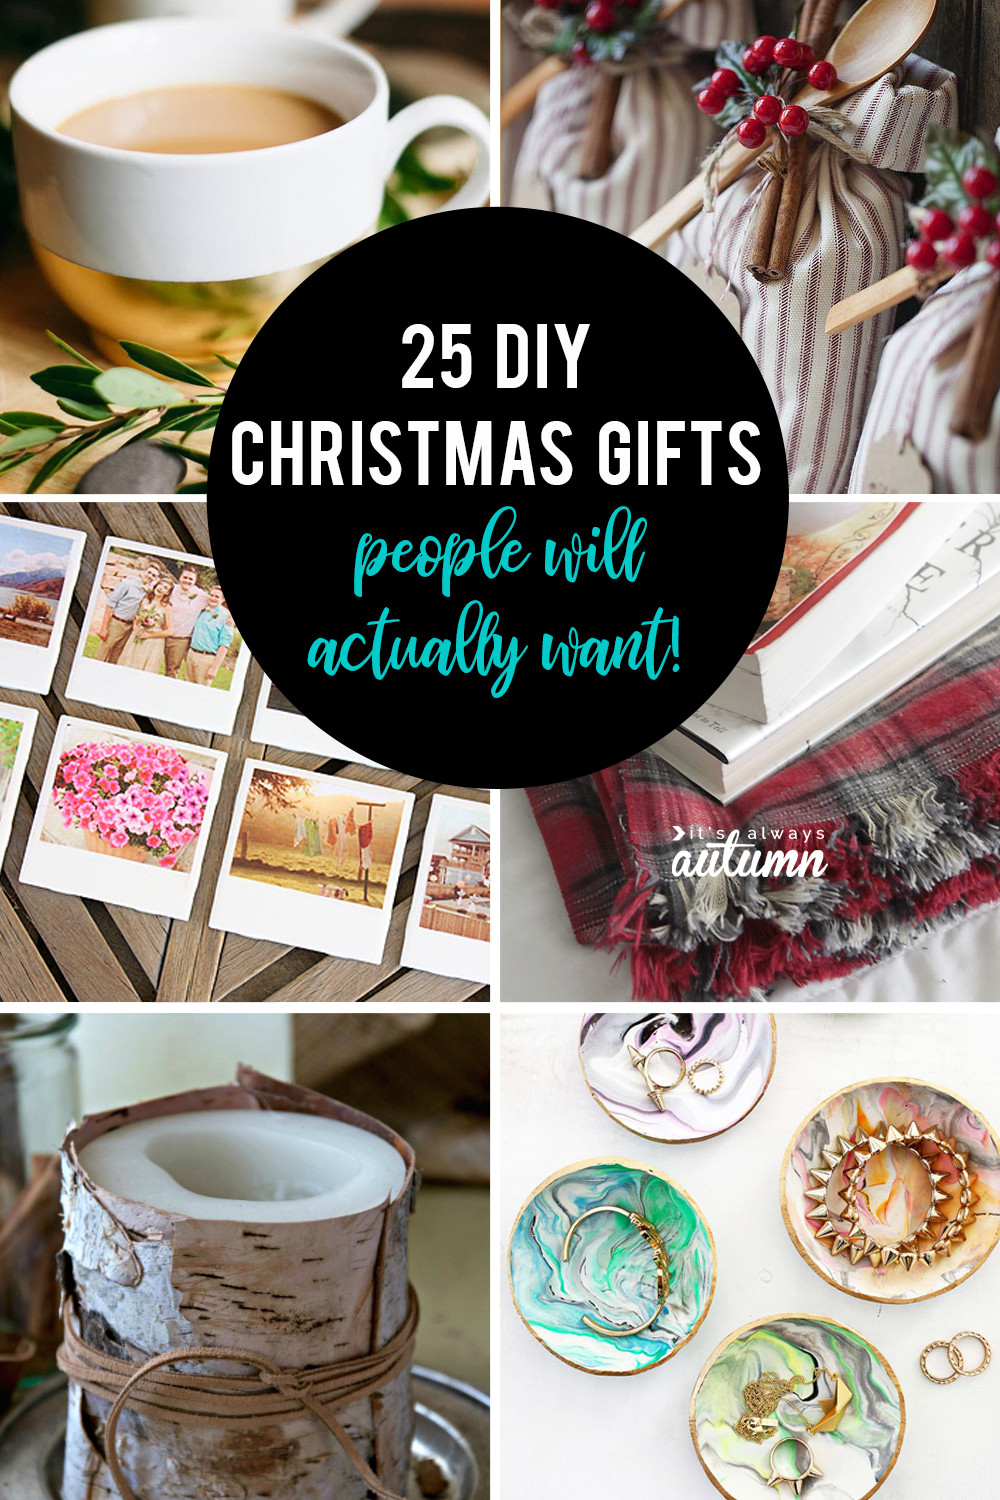 DIY Christmas Gift Ideas
 25 amazing DIY ts people will actually want It s